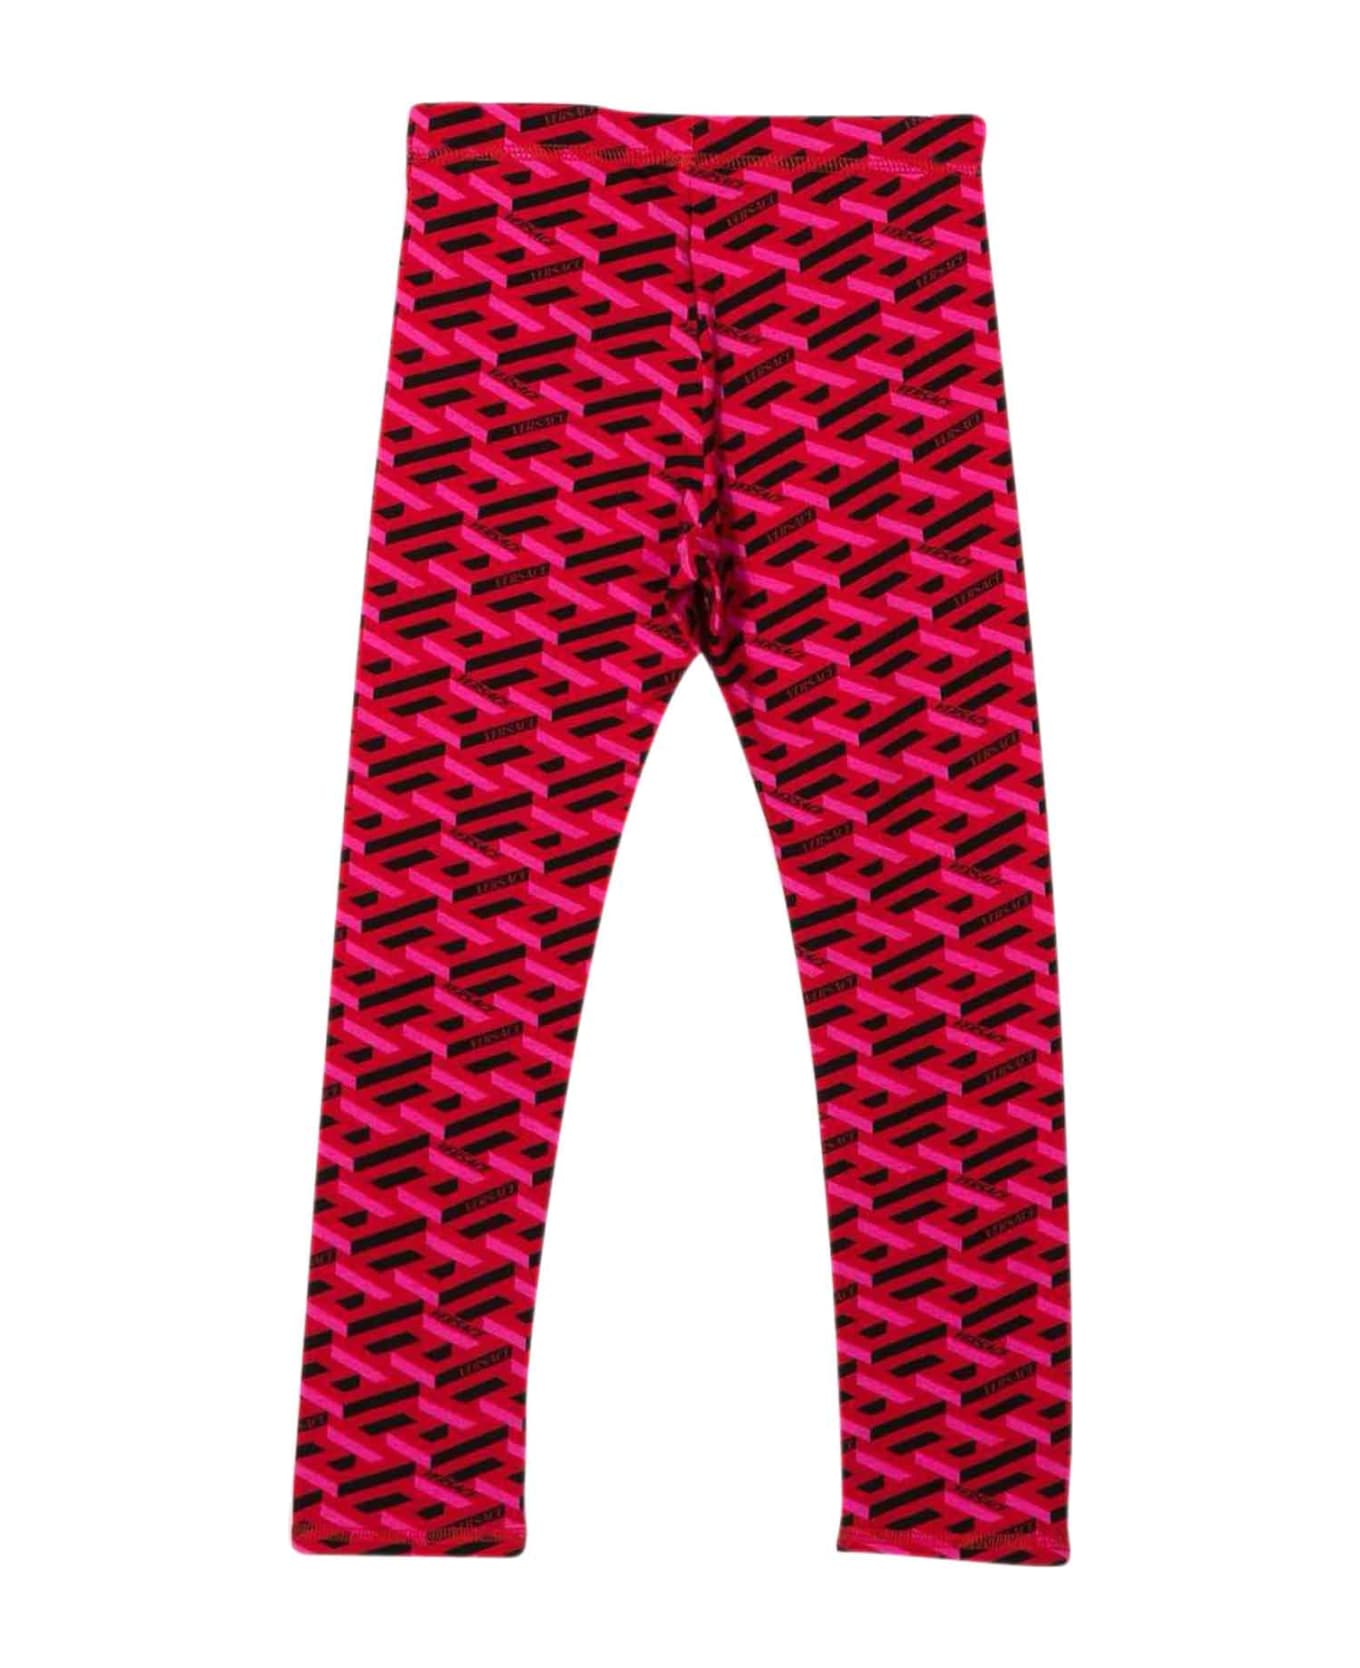 Versace Red Leggings Girl Kids - Rosso/fucsia